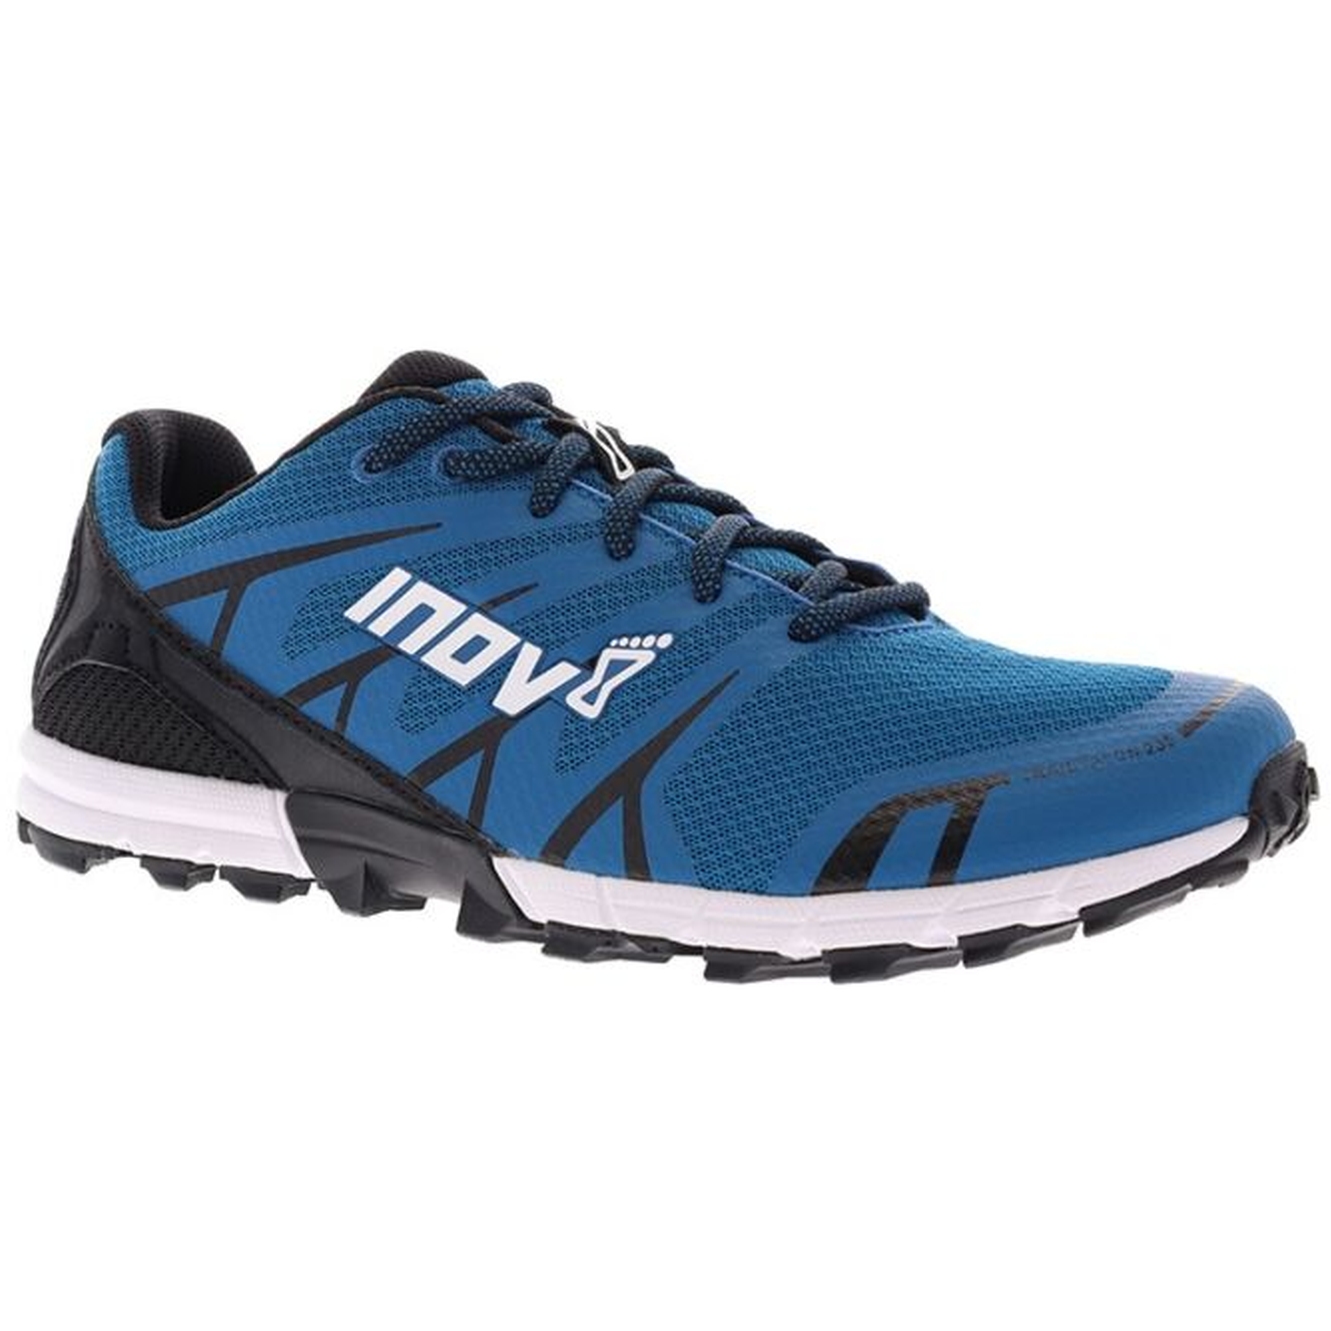 Picture of Inov-8 Trailtalon 235 Wide Trail Running Shoes - blue/navy/white